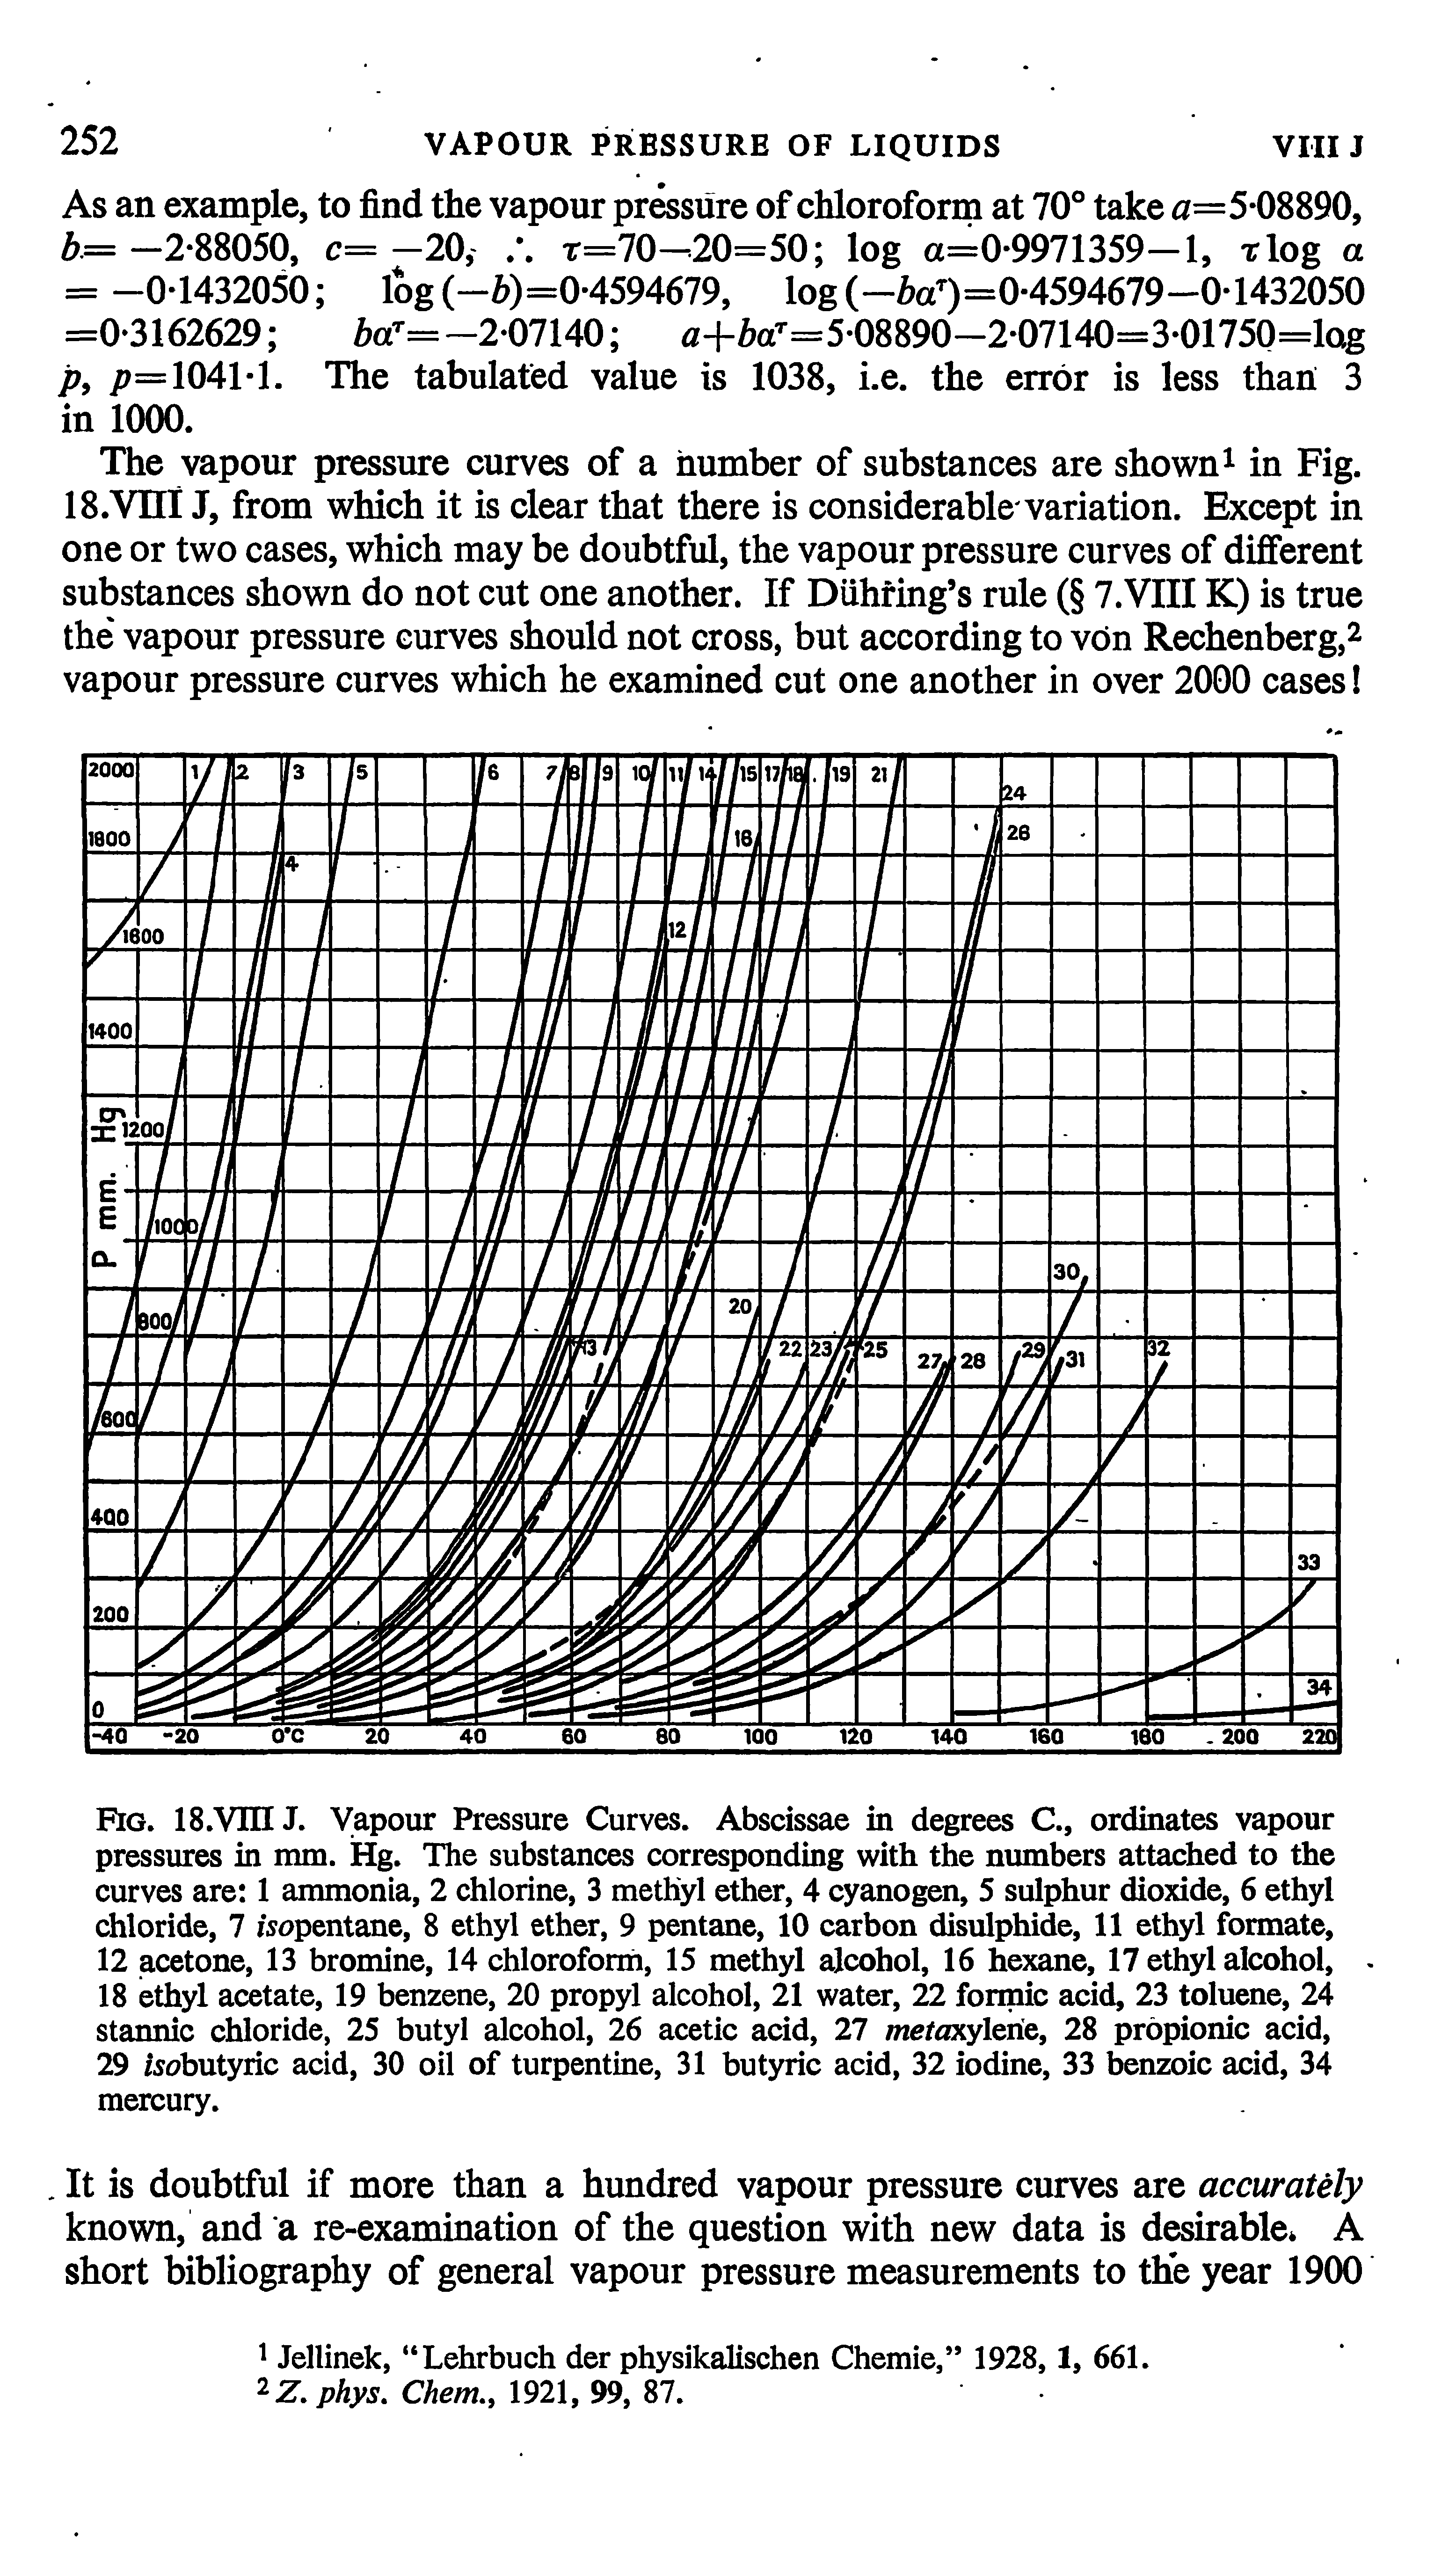 Fig. 18.VmJ. Vapour Pressure Curves. Abscissae in degrees C., ordinates vapour pressures in mm. Hg. The substances corresponding with the numbers attached to the curves are 1 ammonia, 2 chlorine, 3 methyl ether, 4 cyanogen, 5 sulphur dioxide, 6 ethyl chloride, 7 isopentane, 8 ethyl ether, 9 pentane, 10 carbon disulphide, 11 ethyl formate,...